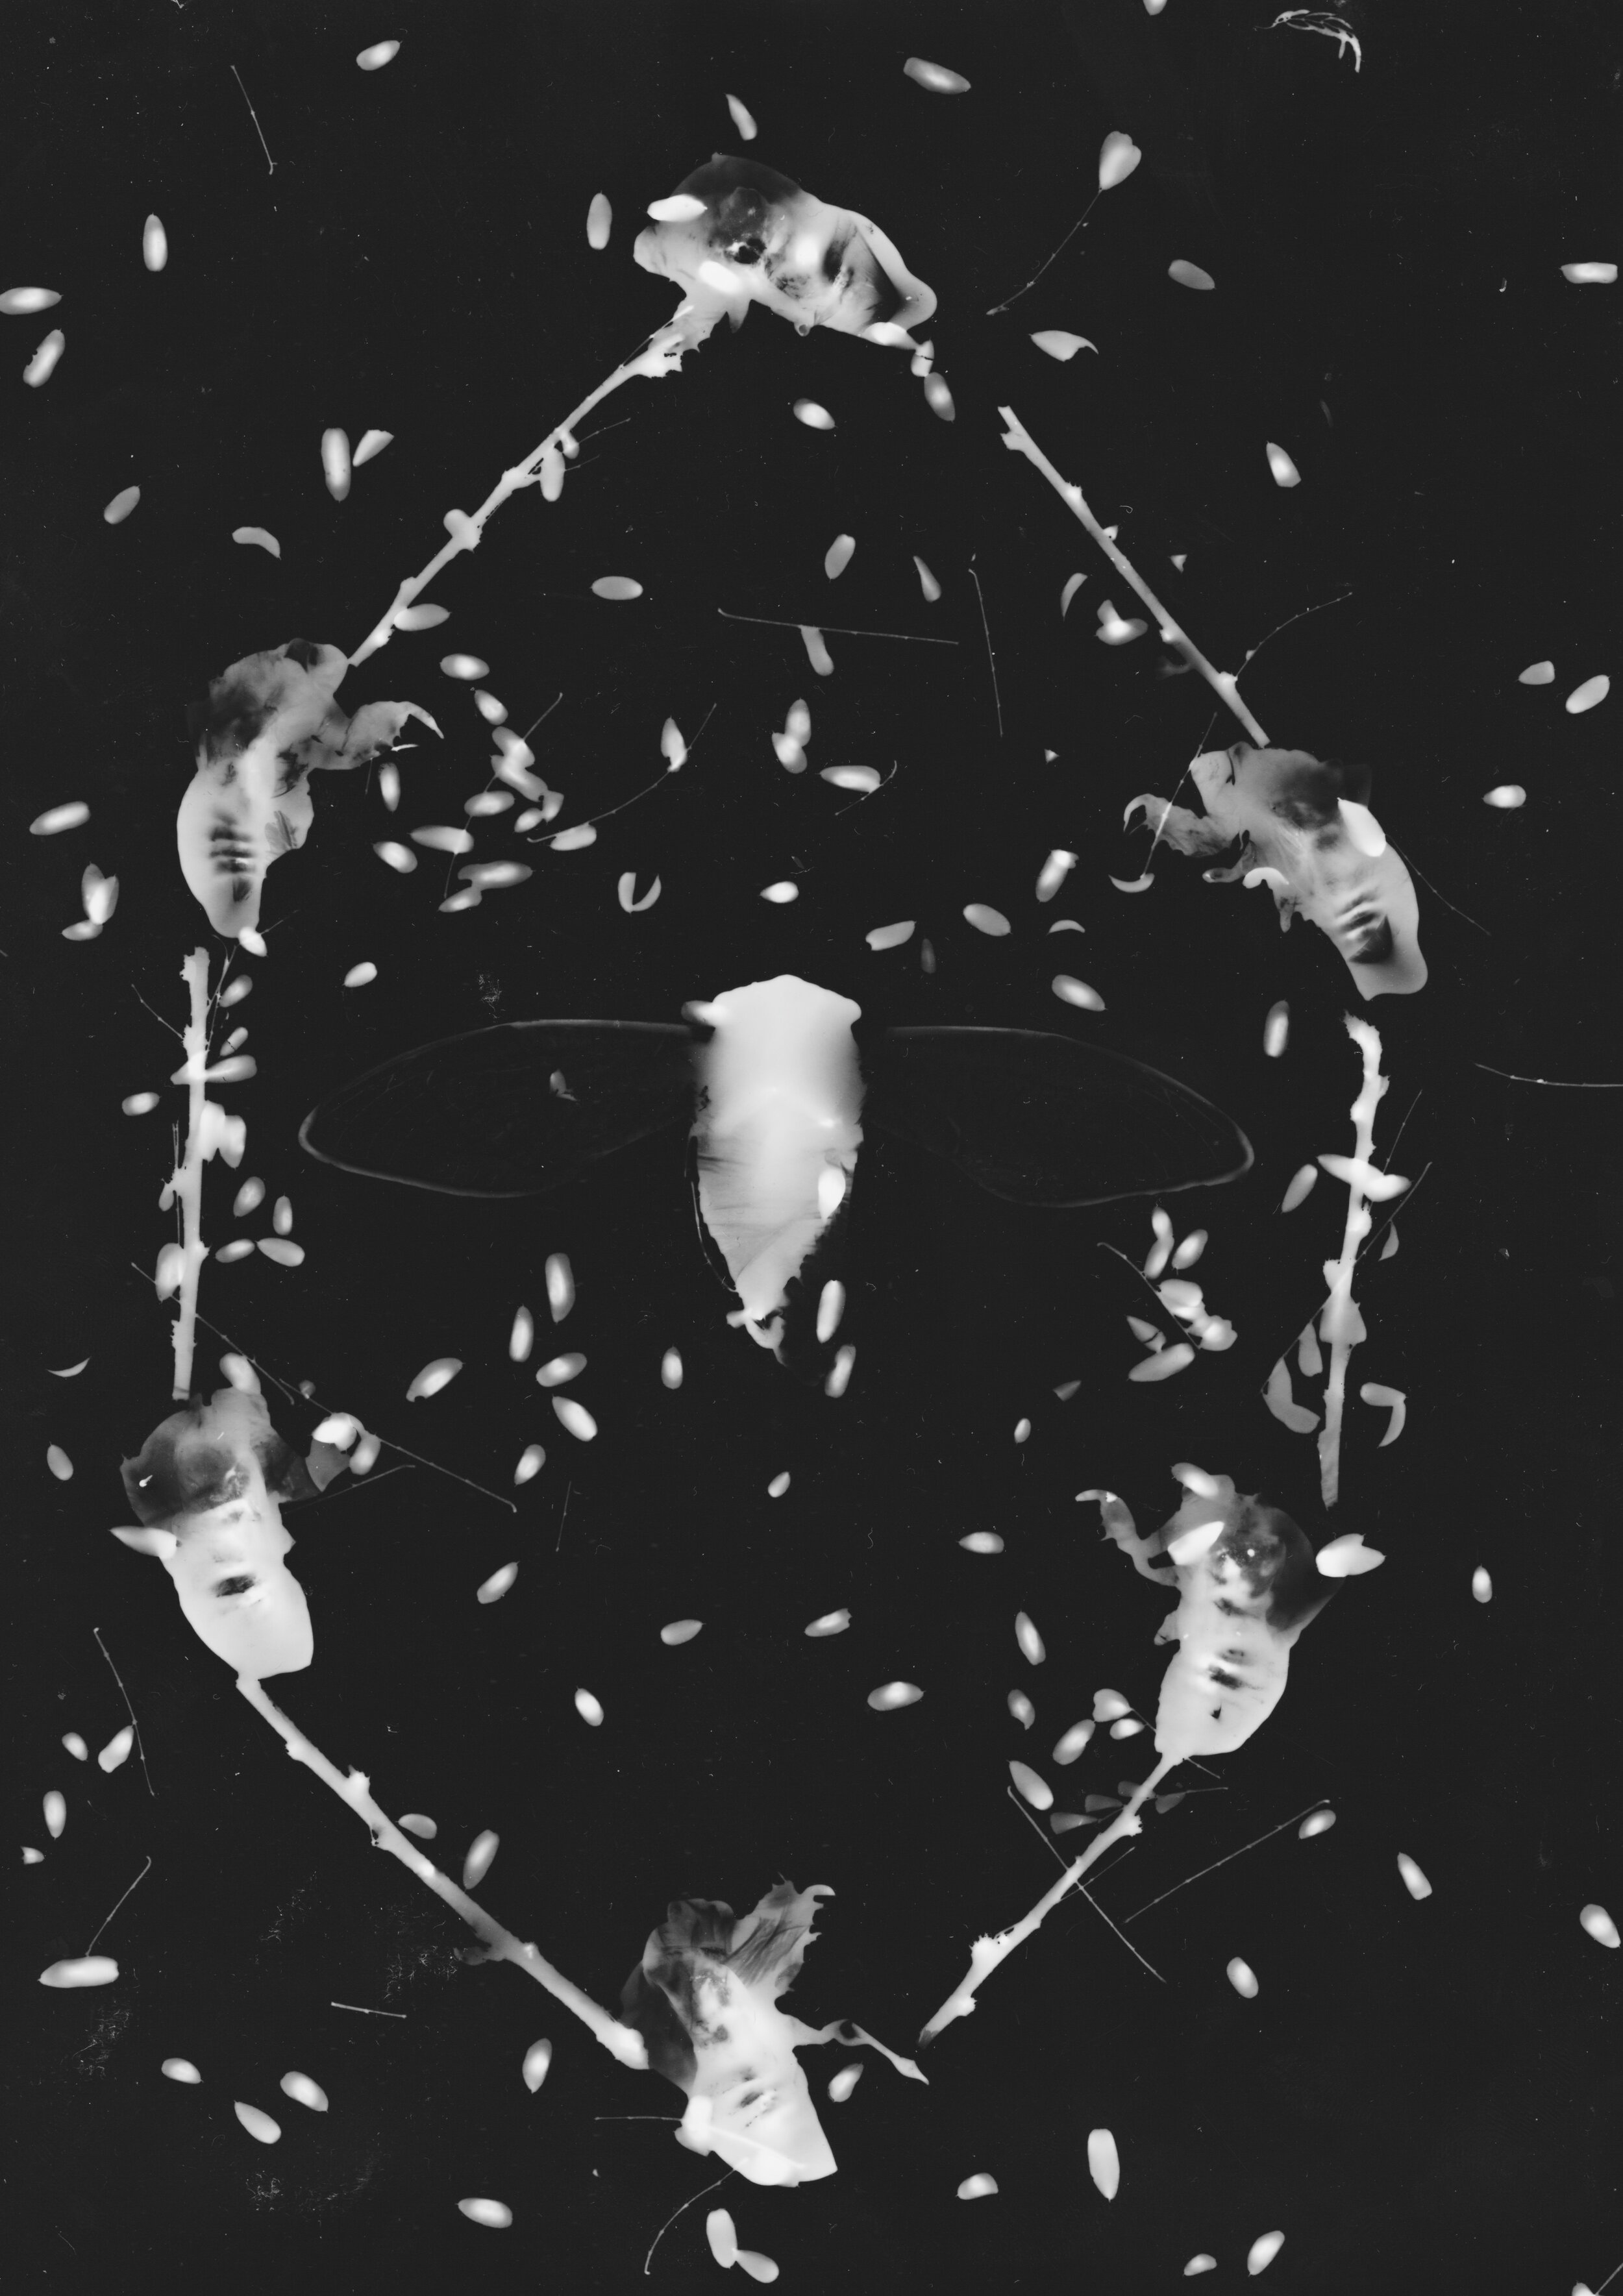    Cycles,   2019  Photogram on silver gelatin paper of cicada exoskeletons collected in Chimayo, NM 